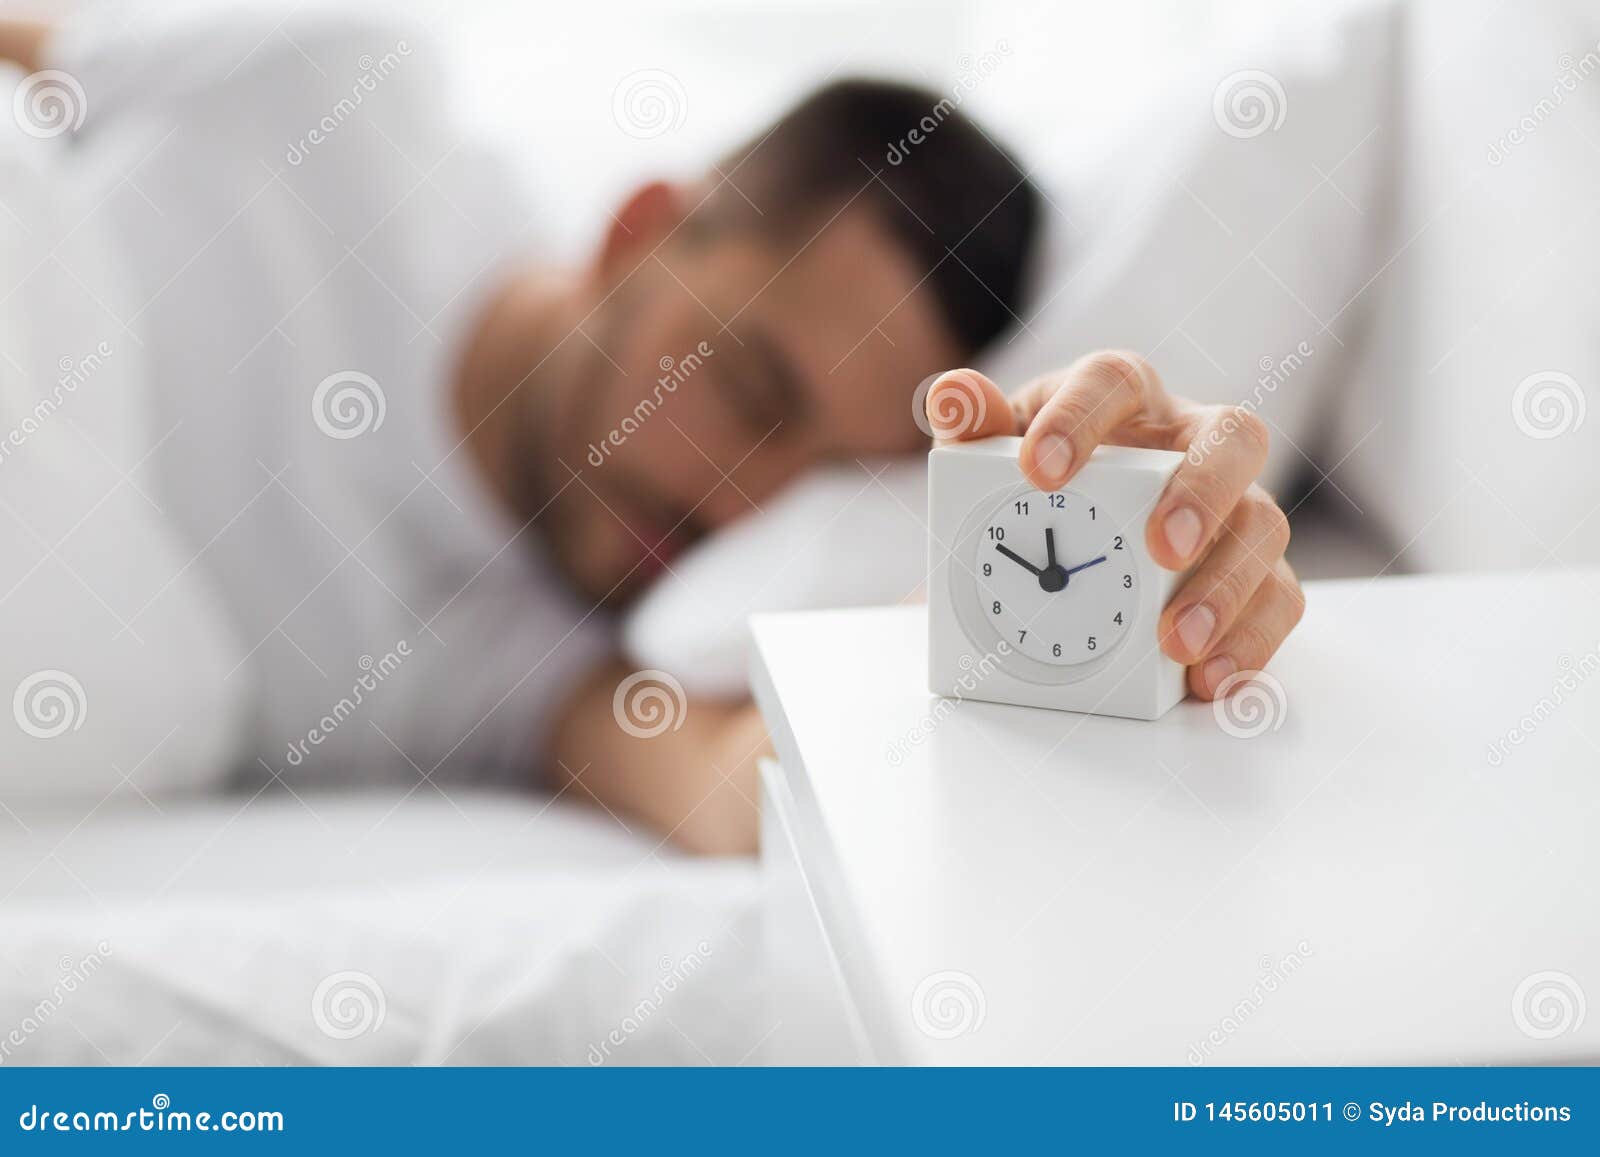 Close Up Of Man In Bed Reaching For Alarm Clock Stock Image Image Of